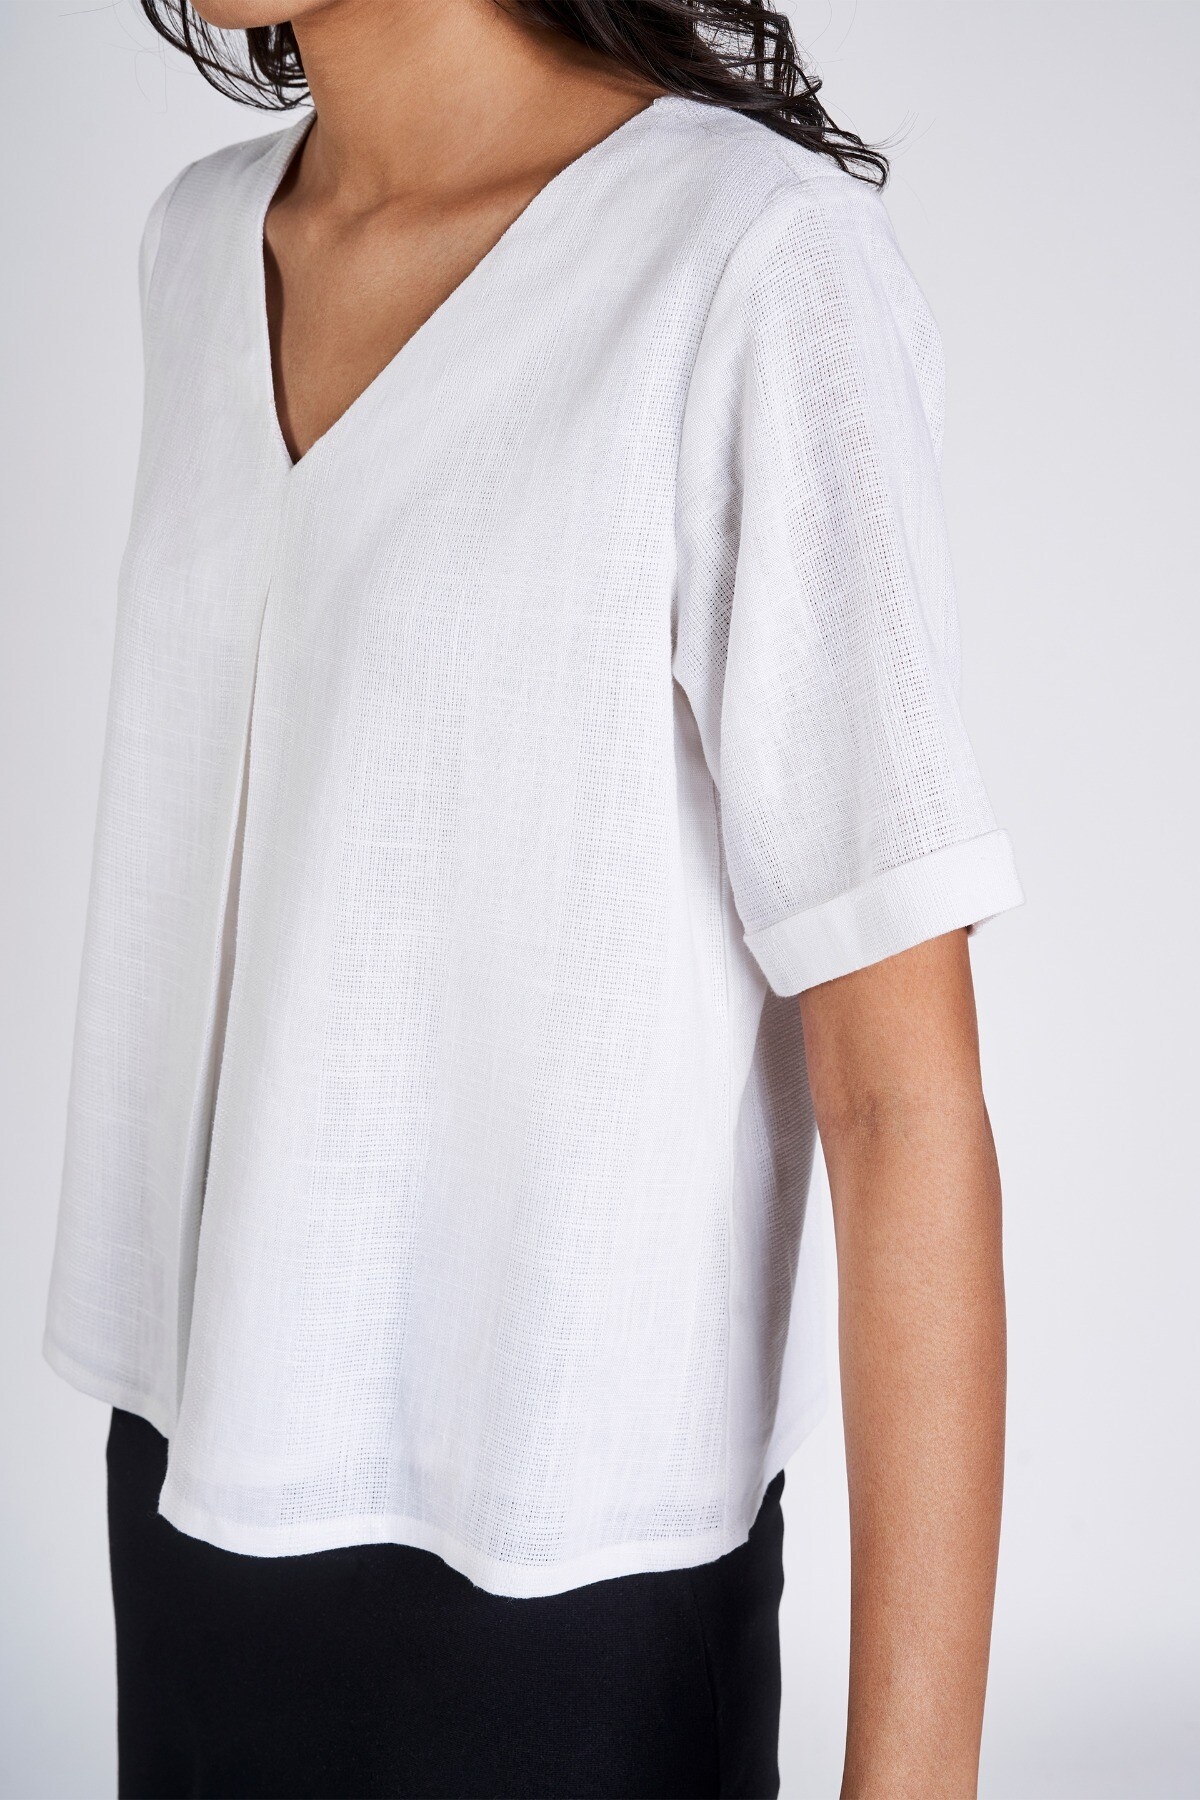 AND | White Solid A-Line Top